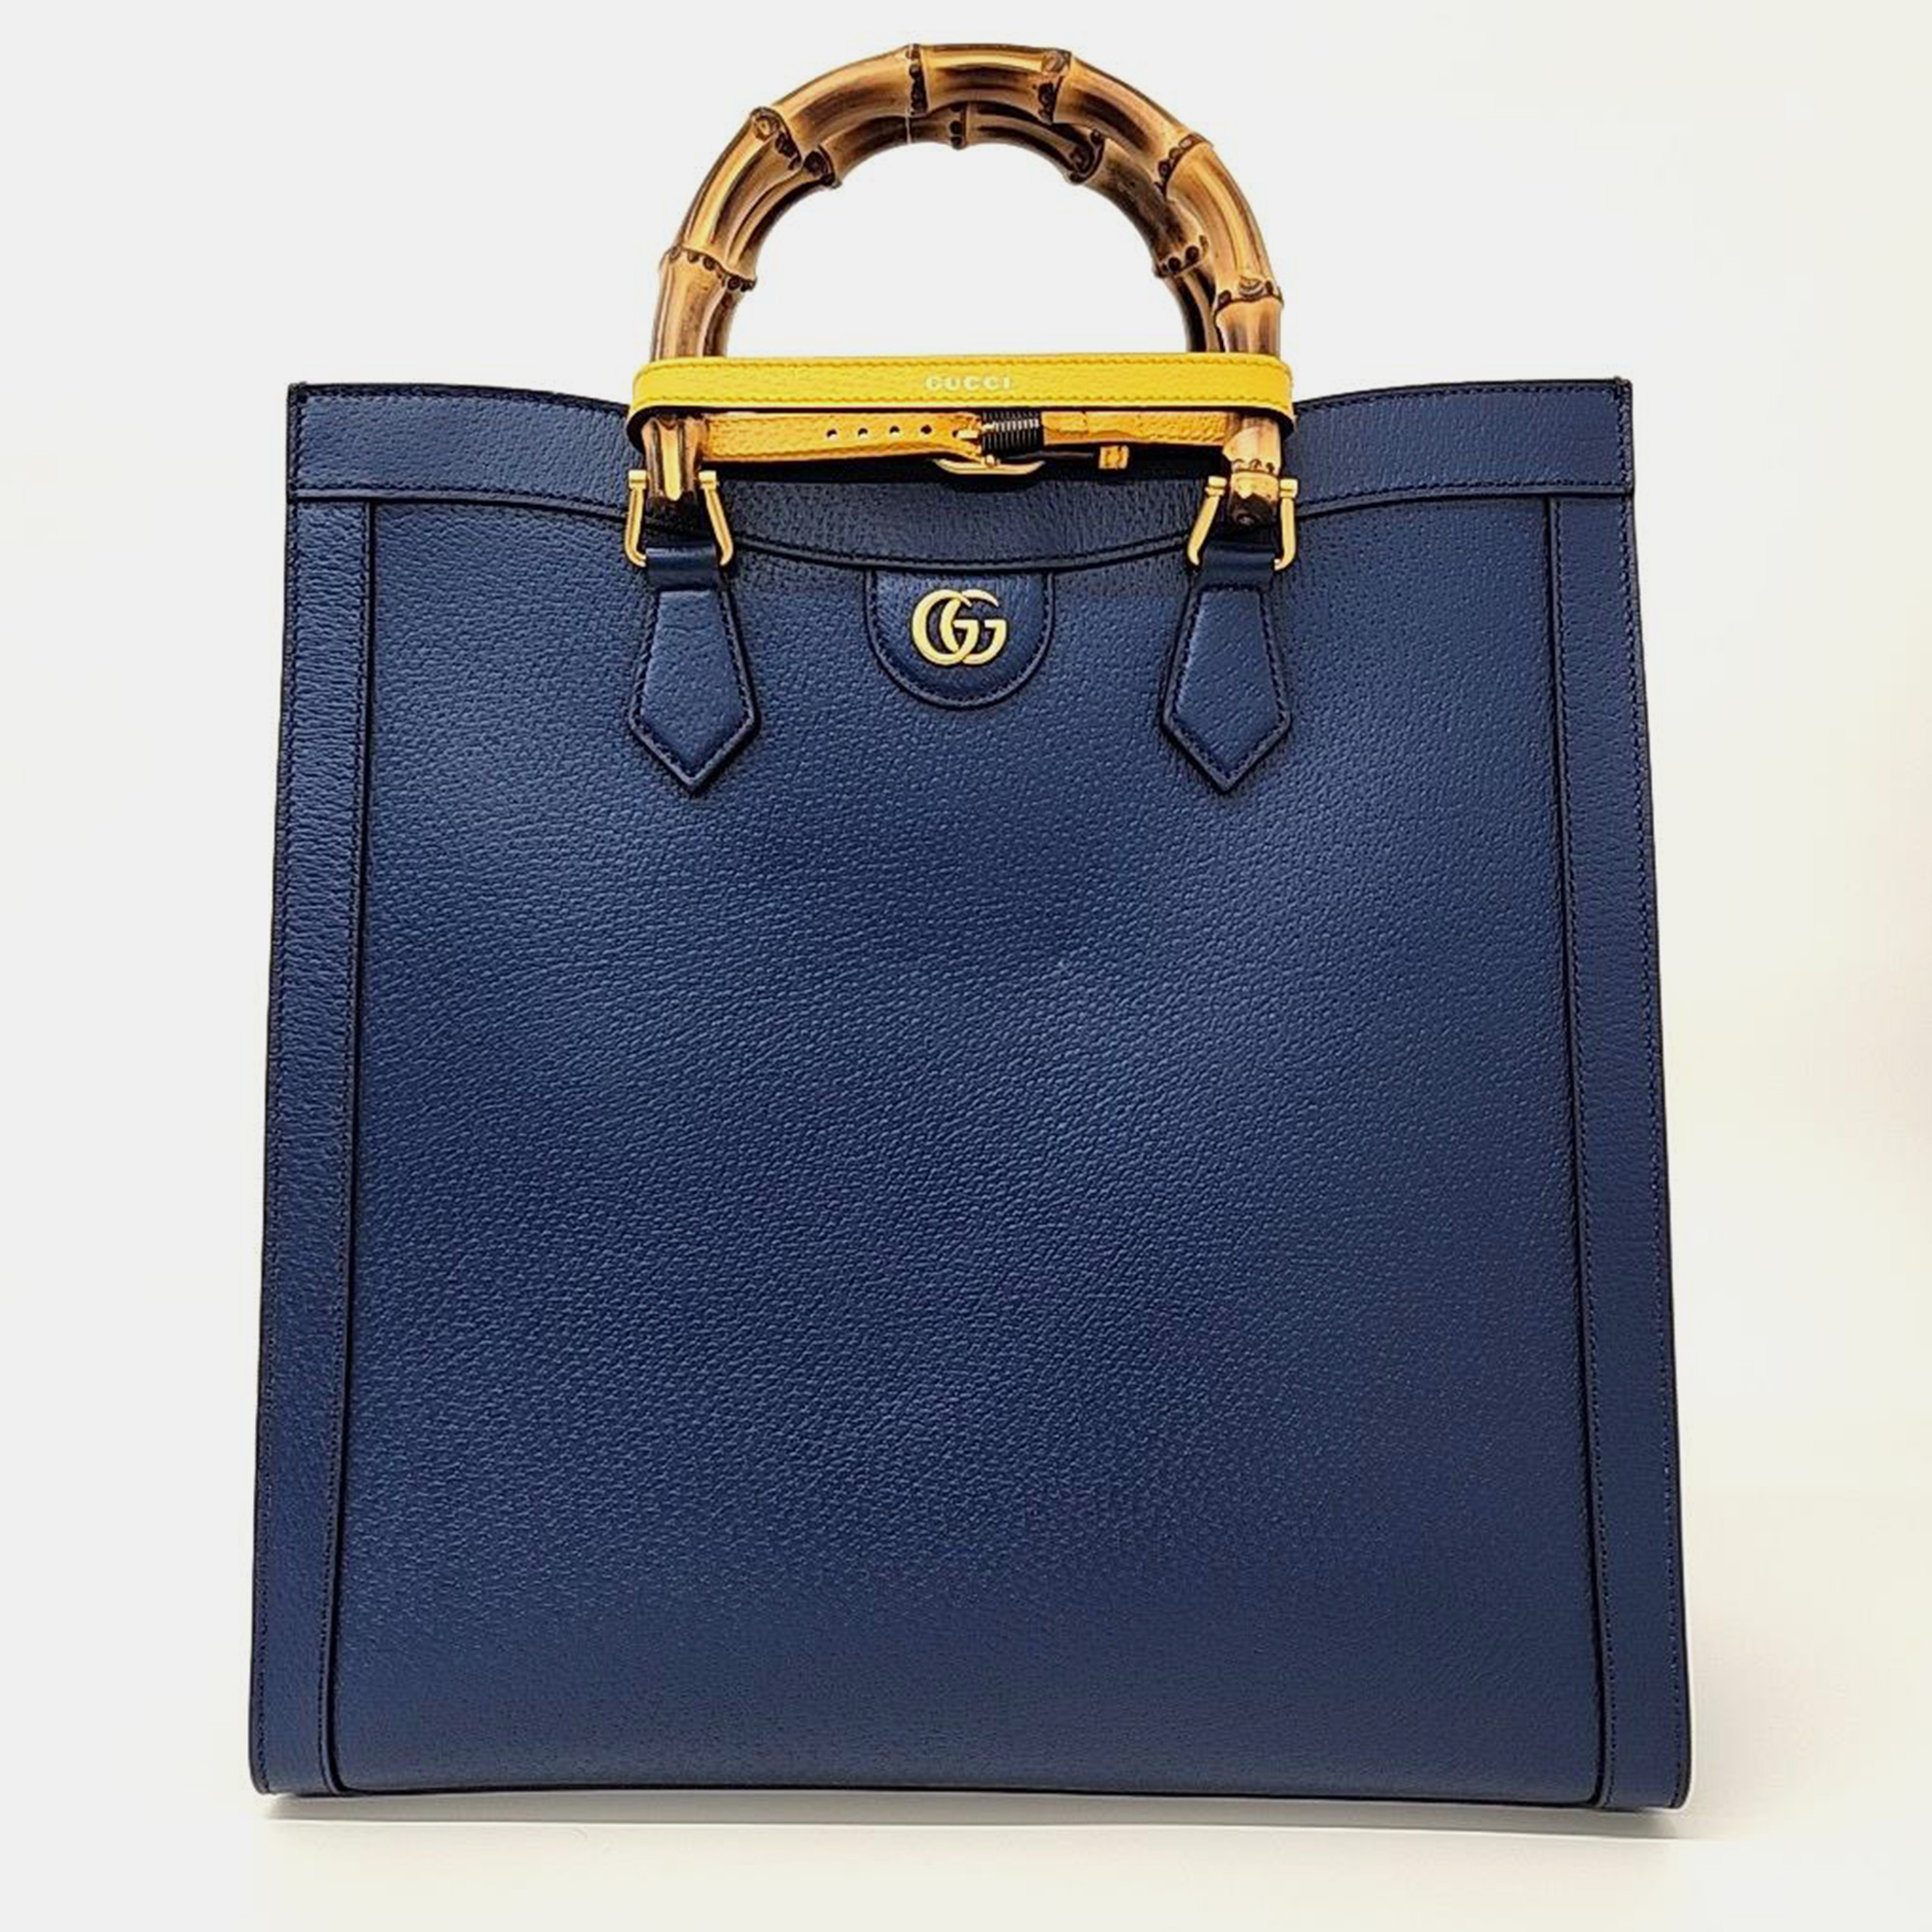 Gucci blue leather large diana tote bag